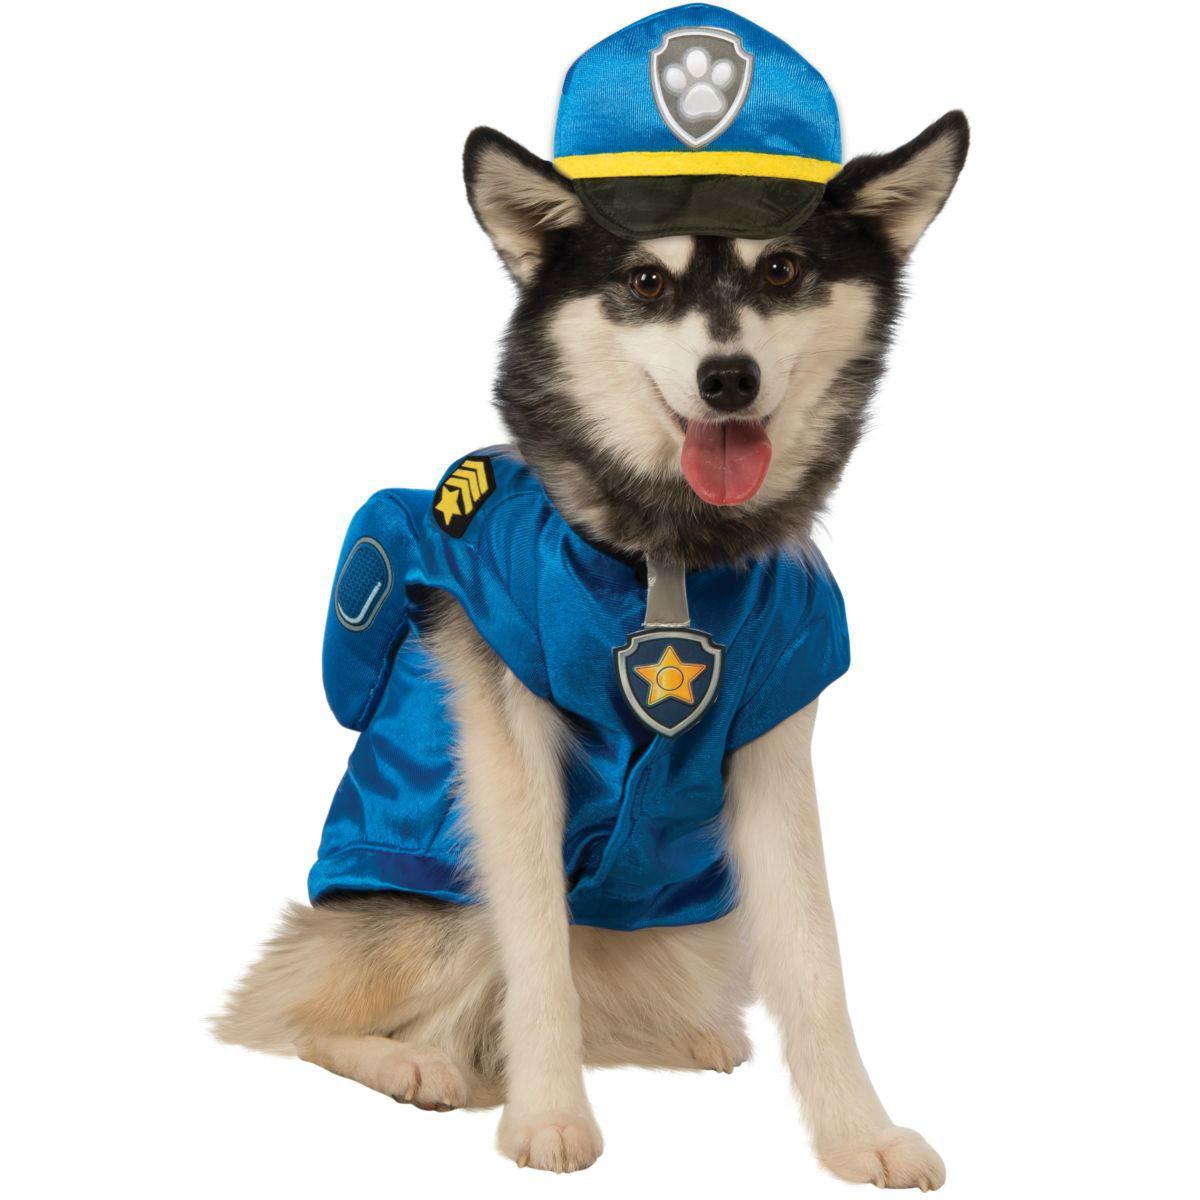 Paw Patrol Chase Dog Costume by Rubies